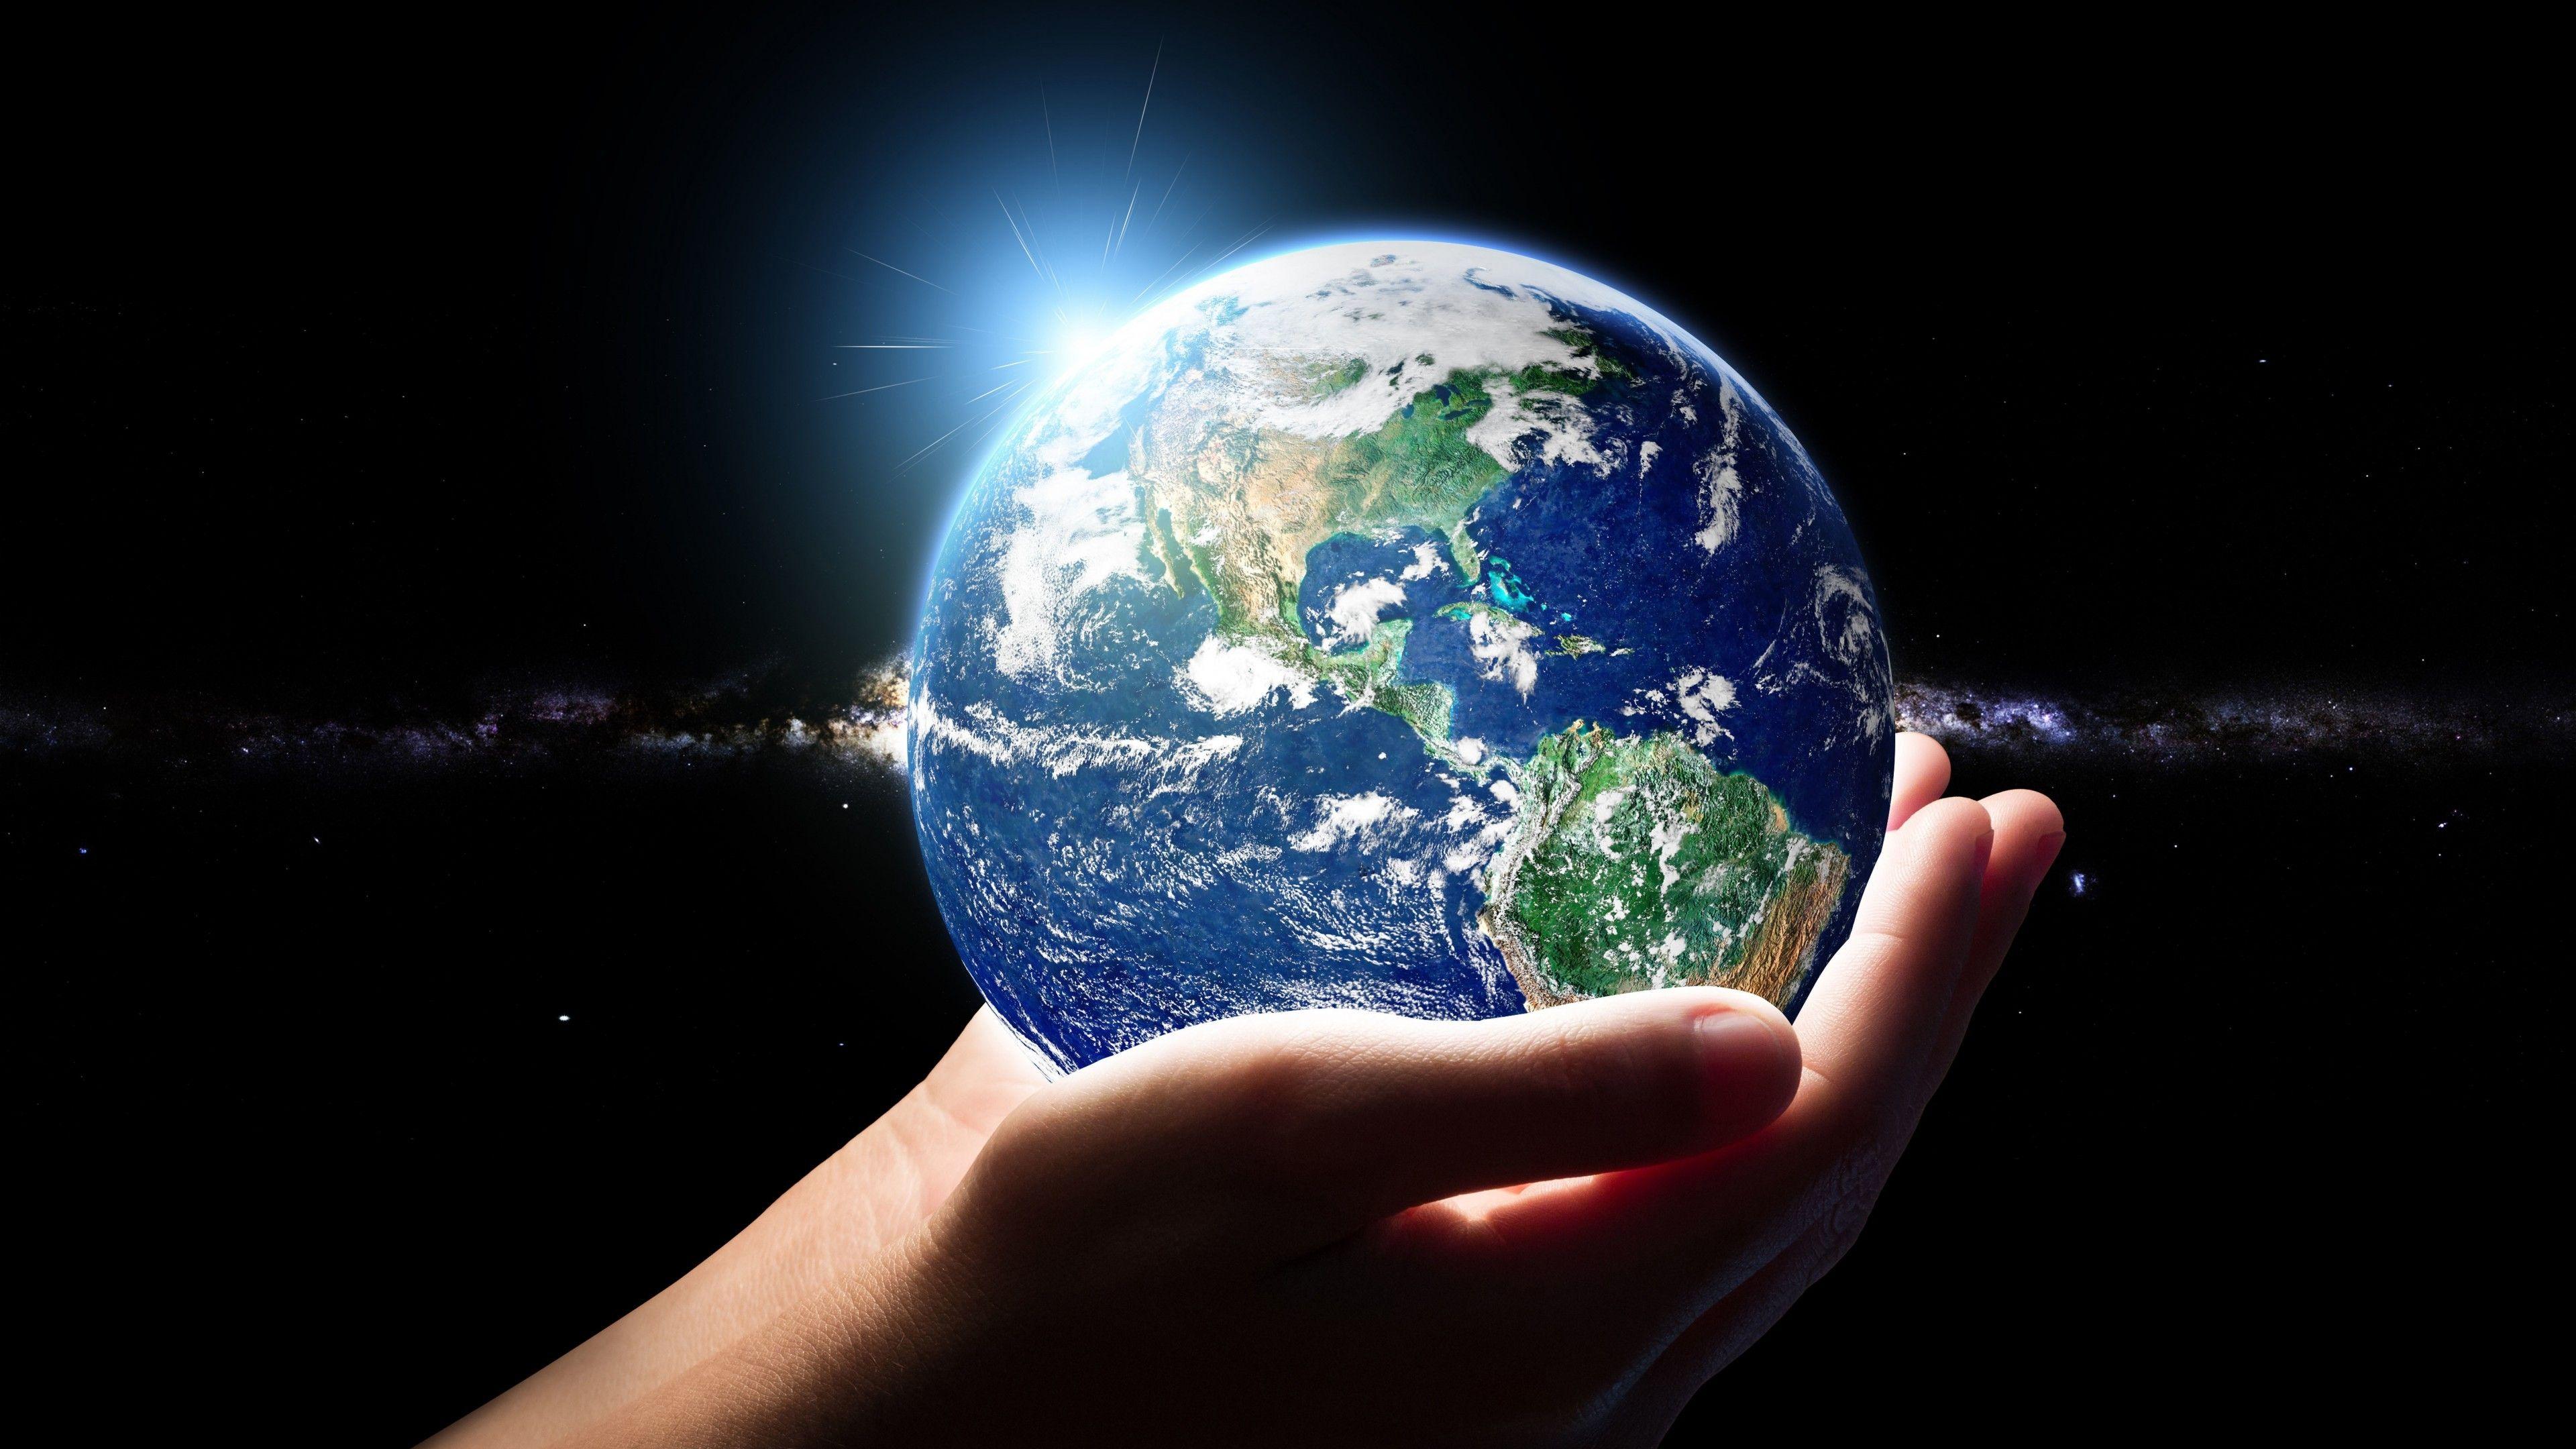 Download 3840x2160 Earth, Hand, Universe Wallpaper for UHD TV